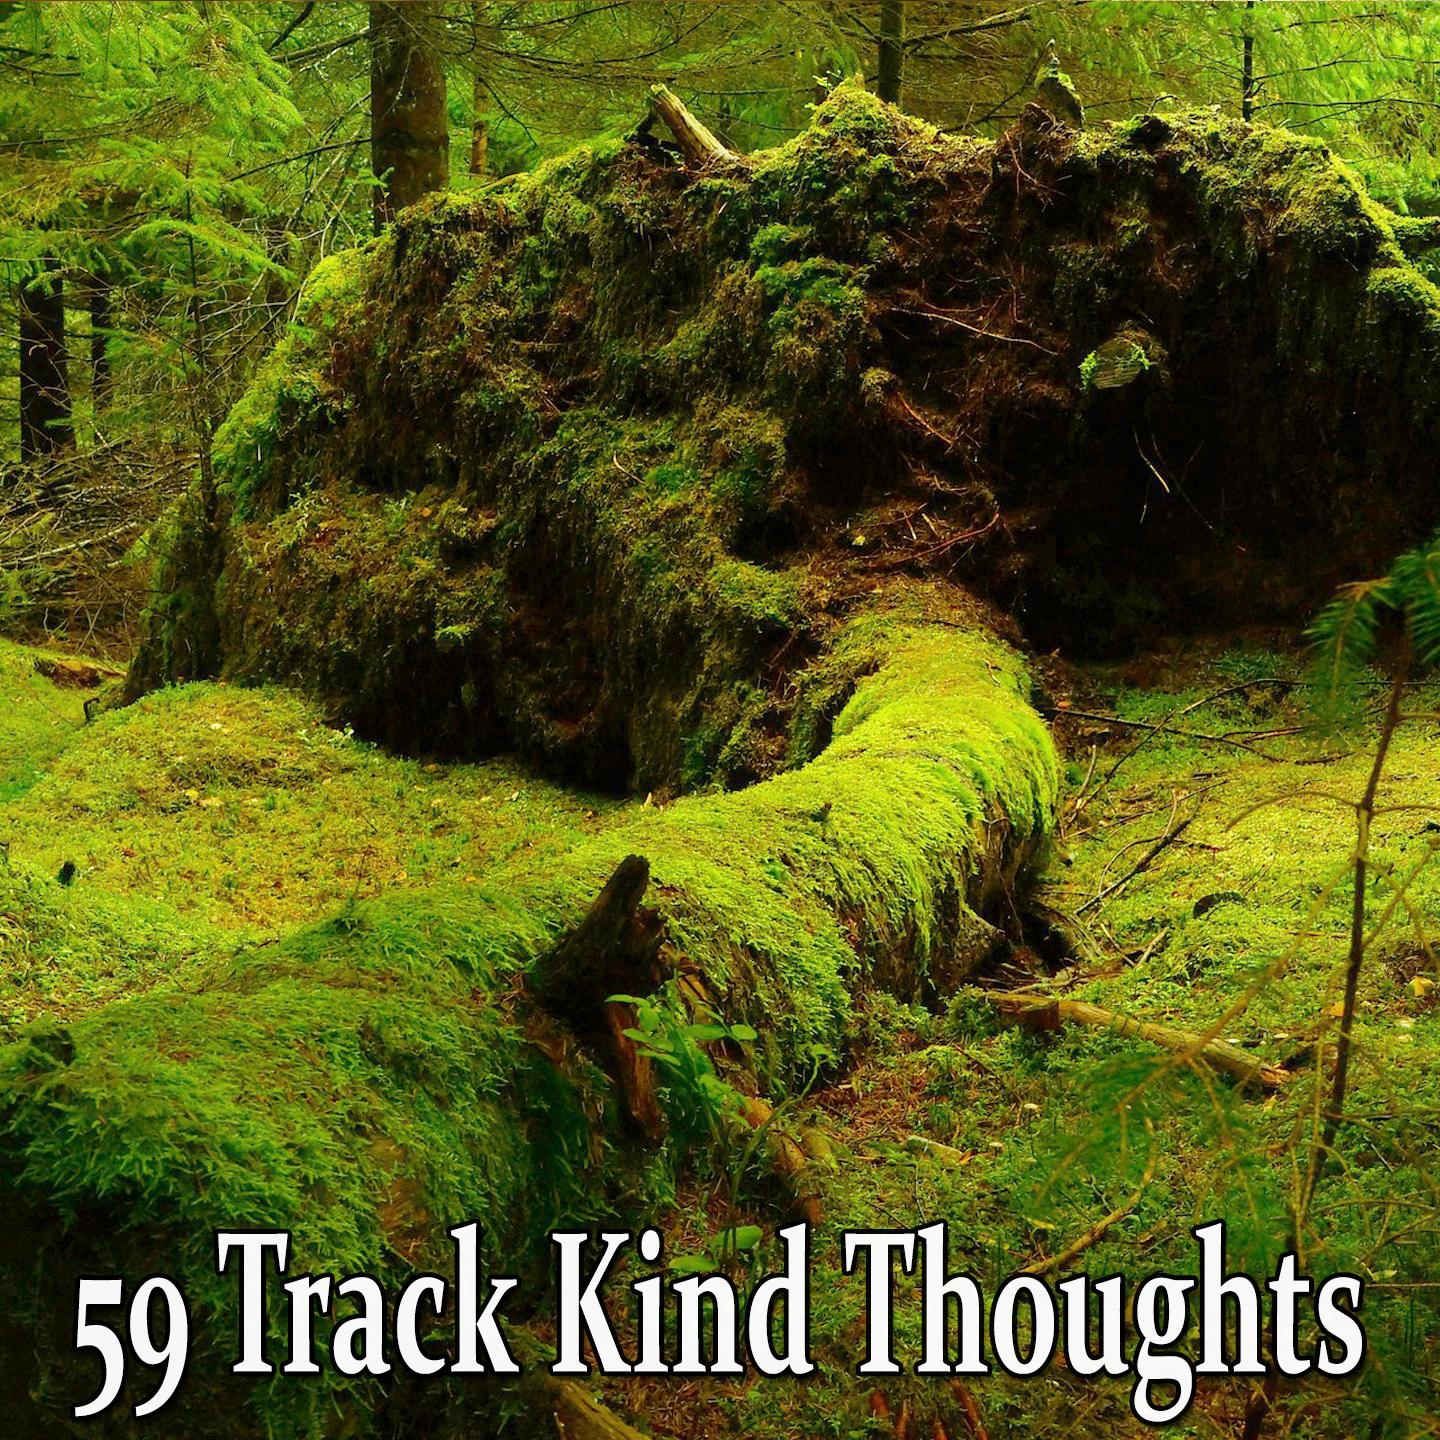 59 Track Kind Thoughts